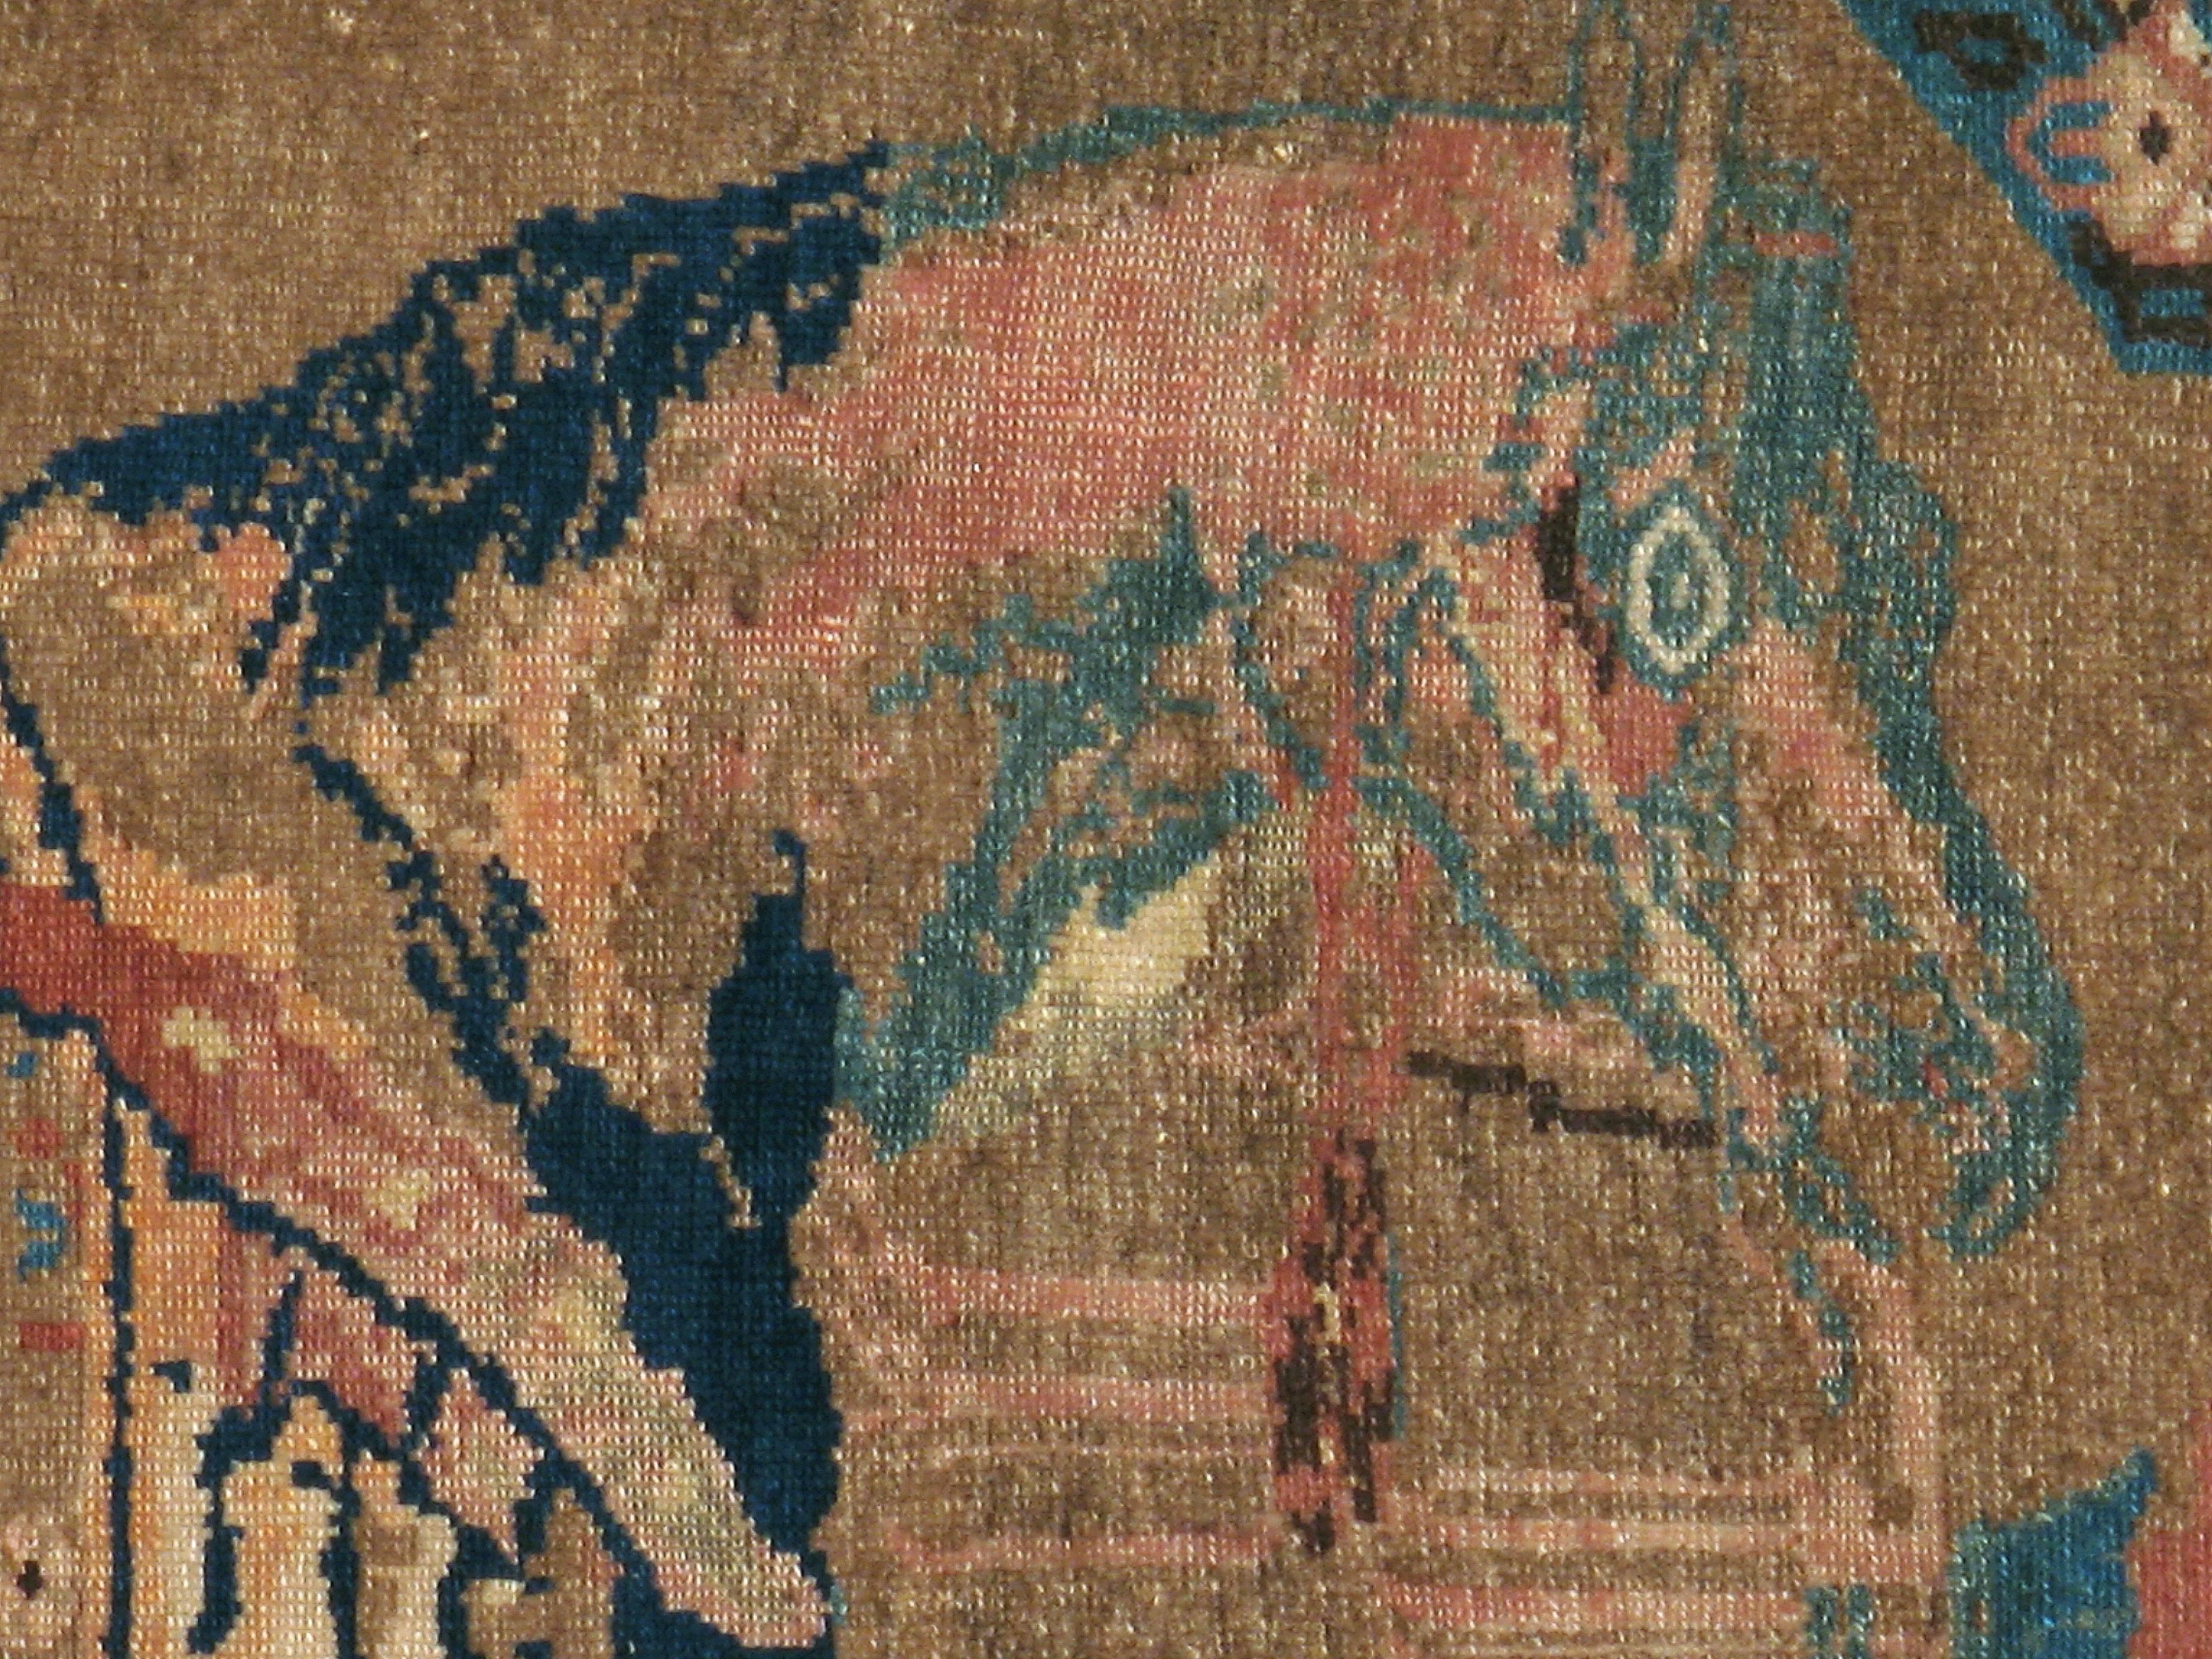 An antique Persian Malayer carpet from the turn of the 20th century with a pictorial design of a horse.